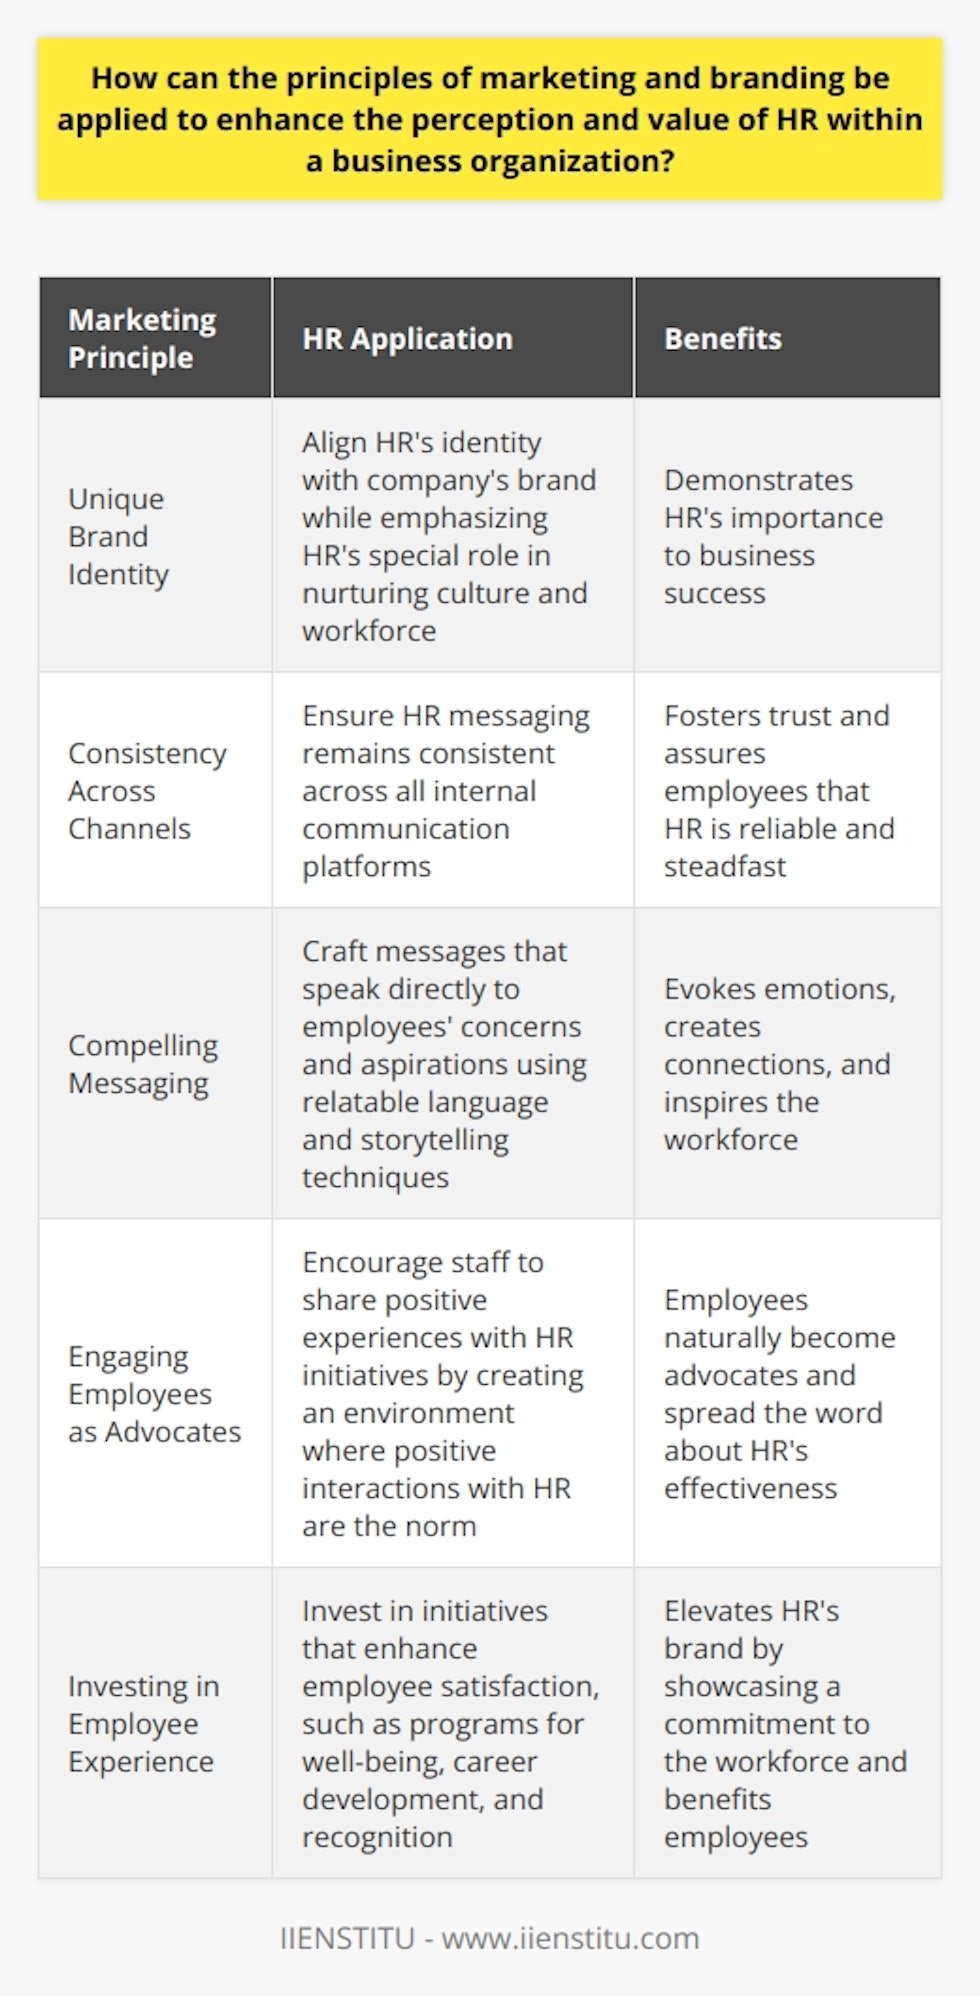 Understanding Marketing Principles in HR Marketing has long inspired customer loyalty and brand recognition. Similarly, HR leaders can apply these principles to enhance their departments image within an organization. Branding in HR encompasses the promotion of HRs value and relevance. It involves shaping perceptions and influencing how employees view HRs role. Creating a Unique HR Brand Identity HR must establish a distinct brand identity. This identity should align with the companys larger brand. Yet, it must emphasize HRs special role in nurturing the companys culture and workforce. HR departments must articulate unique value propositions, much as marketers do. This is essential for demonstrating HRs importance to business success. Maintaining Consistency Across Channels Consistency strengthens brands. HR should ensure its messaging remains consistent across all internal communication platforms. Whether through emails, intranets, or meetings, the messaging should resonate with the chosen HR brand identity. Consistency fosters trust. It assures employees that HR is reliable and steadfast in its practices and policies. Amplifying Value Through Communication Effective communication is key. It underpins successful marketing strategies. HR leaders must be adept communicators. Their messages should highlight HRs contributions and successes. Communication must not only inform but should also engage and inspire the workforce. Developing Compelling Messaging Compelling messages evoke emotions. They create connections. HR should craft messages that speak directly to employees concerns and aspirations. This involves using relatable language and storytelling techniques. Telling success stories about how HR initiatives have improved the work environment can be powerful. Engaging Employees as Advocates Employees can be the best brand ambassadors. HR should encourage staff to share positive experiences with HR initiatives. This involves creating an environment where positive interactions with HR are the norm. When employees have good experiences, they naturally become advocates. They spread the word about HRs effectiveness. Leveraging Social Proof Social proof lends credibility. Testimonials and case studies about HRs impact can validate the departments importance. Sharing these success stories across the organization can boost HRs image. It may also attract the best talent.  Investing in Employee Experience Brands thrive when customers are happy. Likewise, HR brands flourish when employees are satisfied with their work experience. HR should invest in initiatives that enhance employee satisfaction. Programs for well-being, career development, and recognition are good examples. These programs not only benefit employees. They also elevate HRs brand by showcasing a commitment to the workforce. Refining HR Services Just as marketers improve products, HR must refine its services. Continual improvement shows that the department is responsive and adaptive. It helps to solidify HRs reputation as a key contributor to the organizations growth and sustainability. Regular feedback loops with employees can identify areas for enhancement. Applying marketing and branding principles can significantly boost HRs standing in an organization. HR leaders who embrace these strategies create a strong, valued HR brand. This branding effort will underscore HRs vital role in the companys success. With consistent messaging, engaging communication, and solid employee experiences, HR can transform its perception and increase its value to the business.